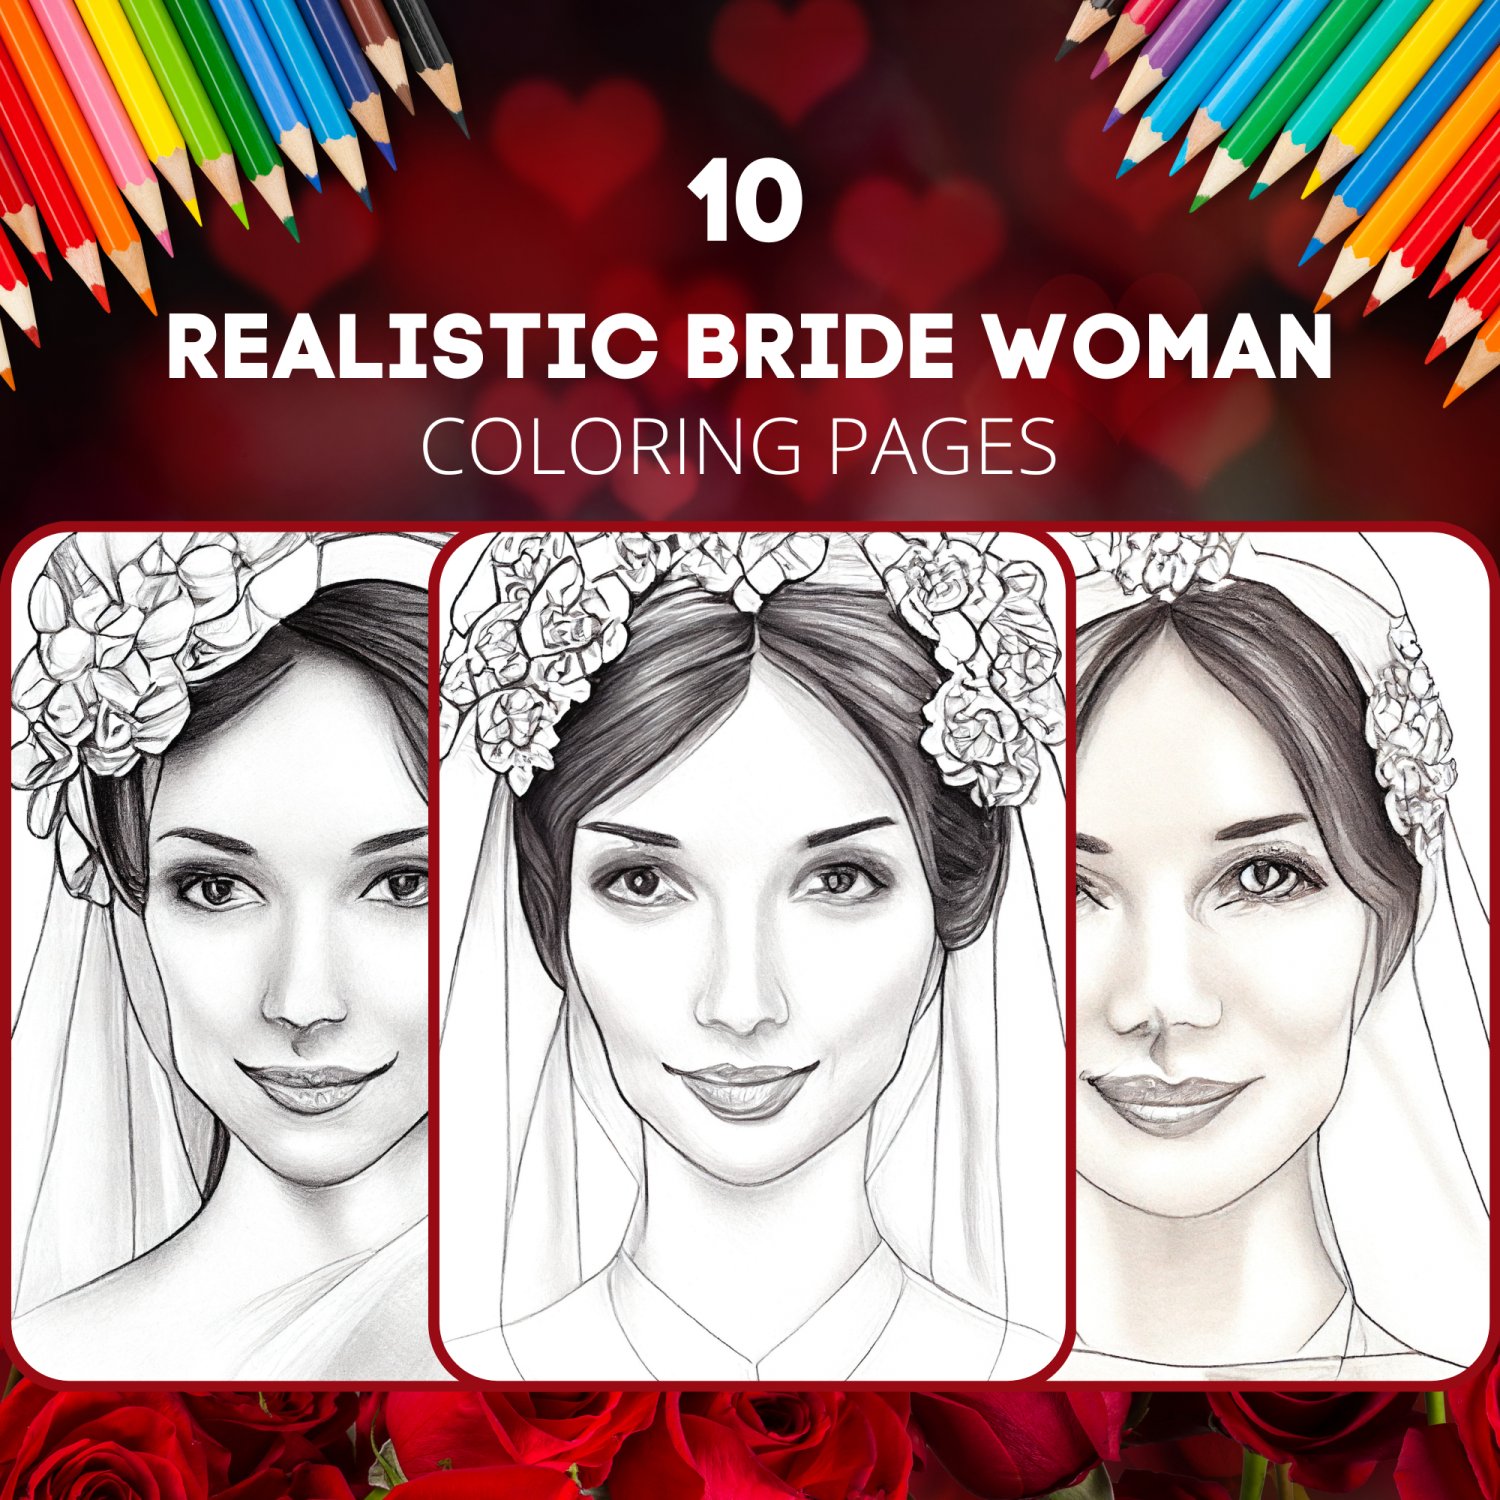 Realistic Bride Women Coloring Pages: 10 Printable Boho Themed Pages for Adult Coloring Books